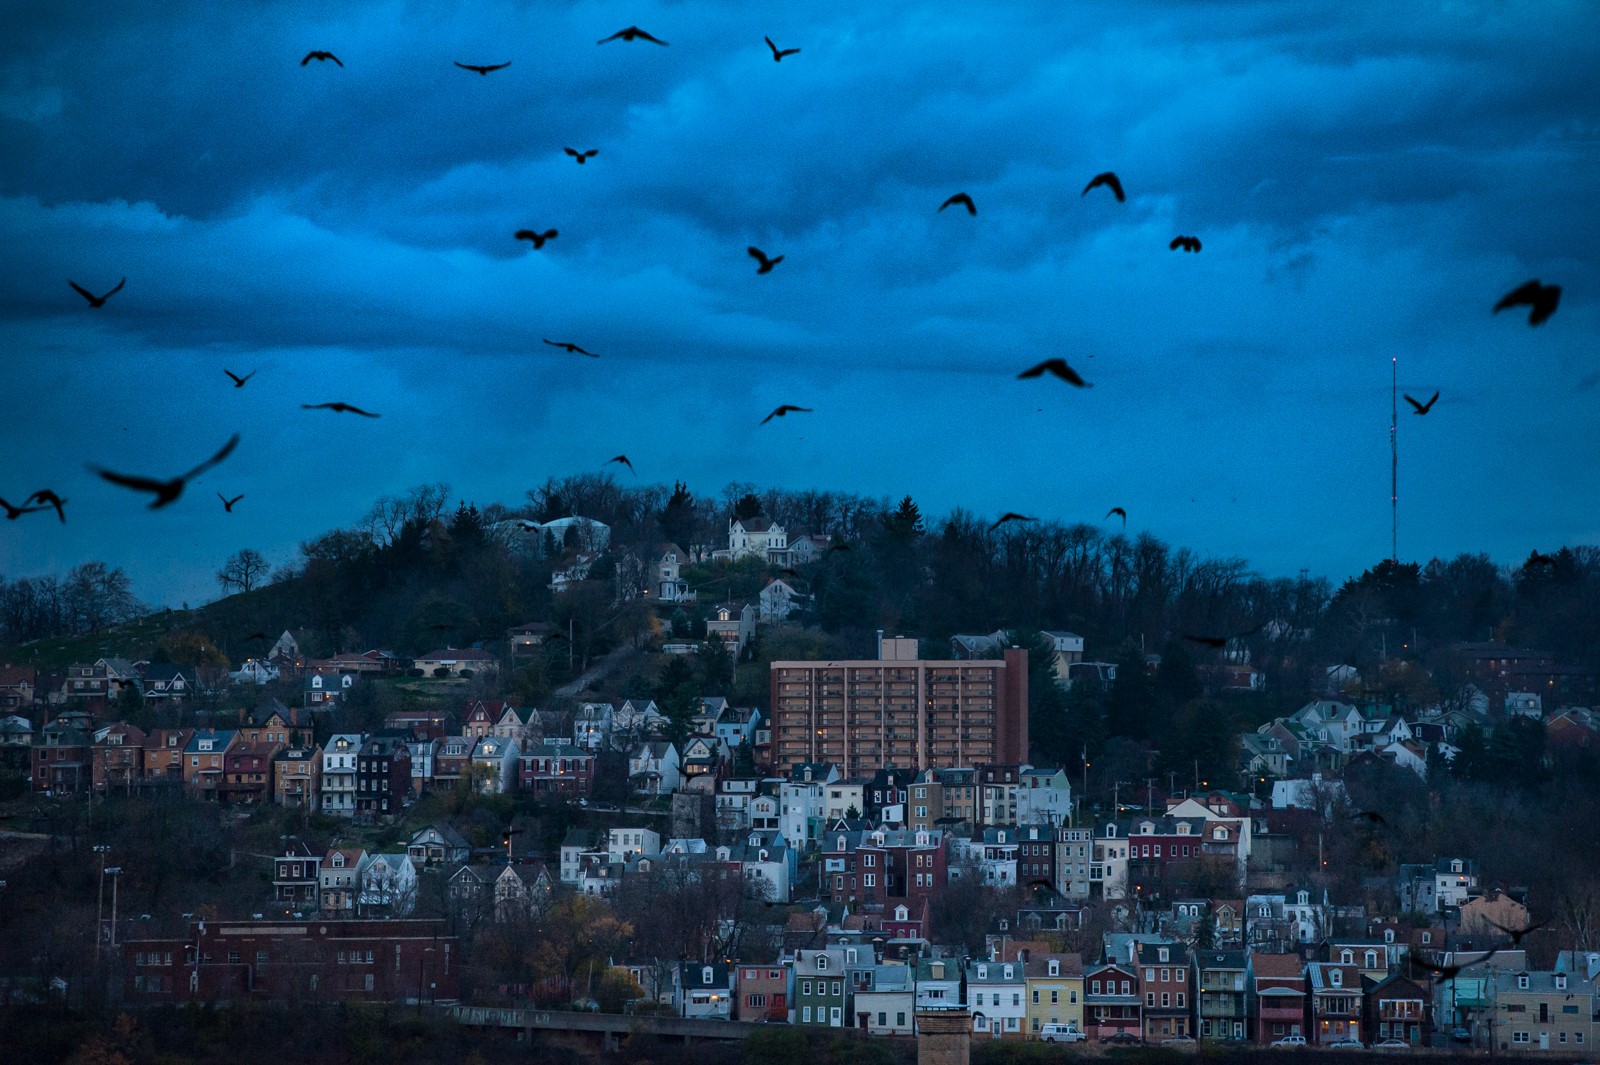 Crows take flight against a hillside of crowded homes.